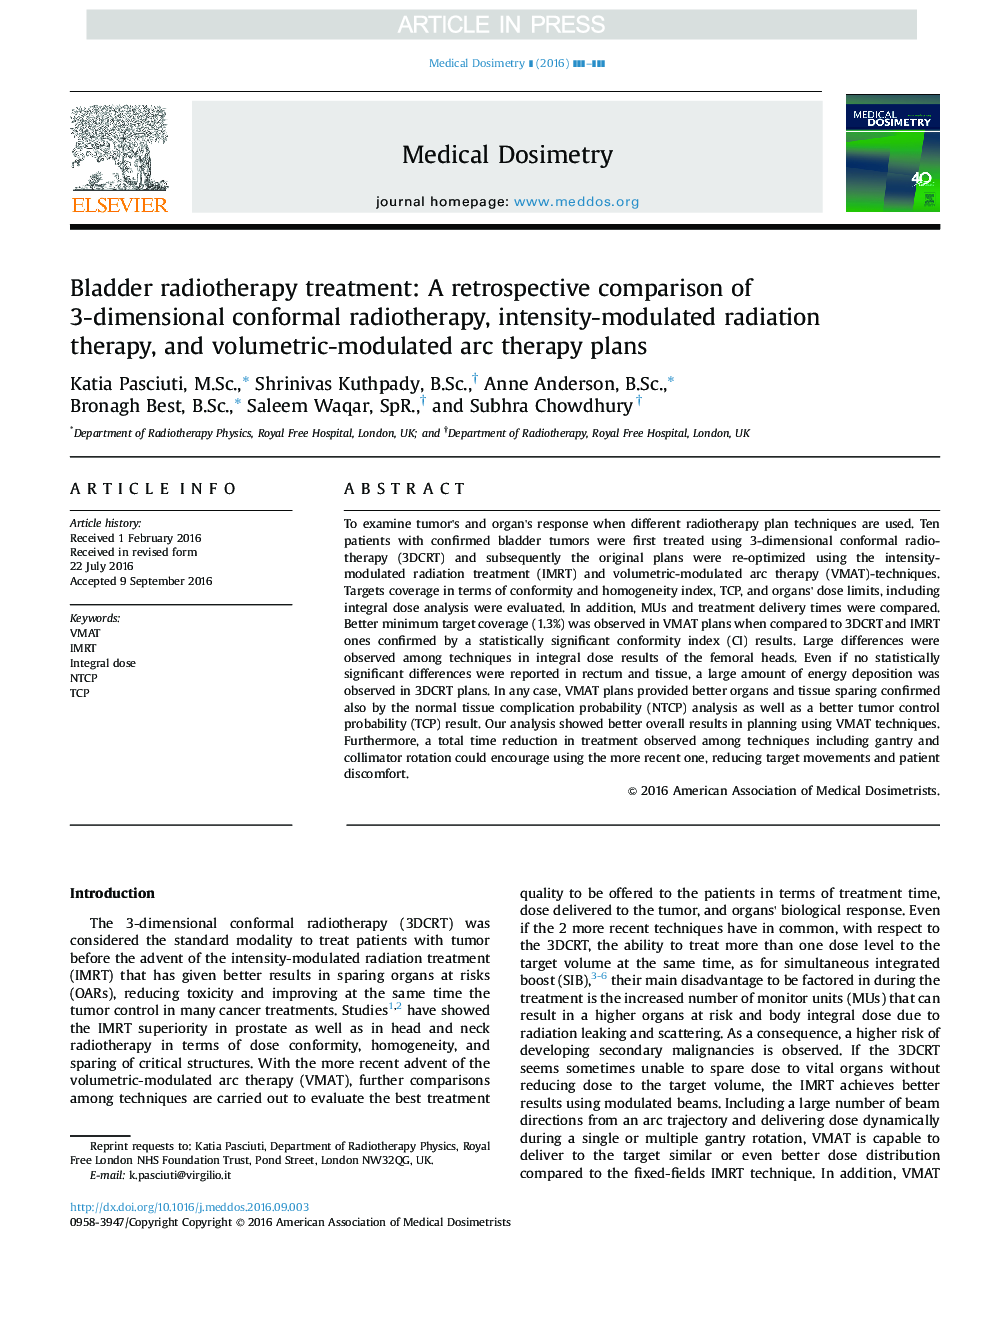 Bladder radiotherapy treatment: A retrospective comparison of 3-dimensional conformal radiotherapy, intensity-modulated radiation therapy, and volumetric-modulated arc therapy plans